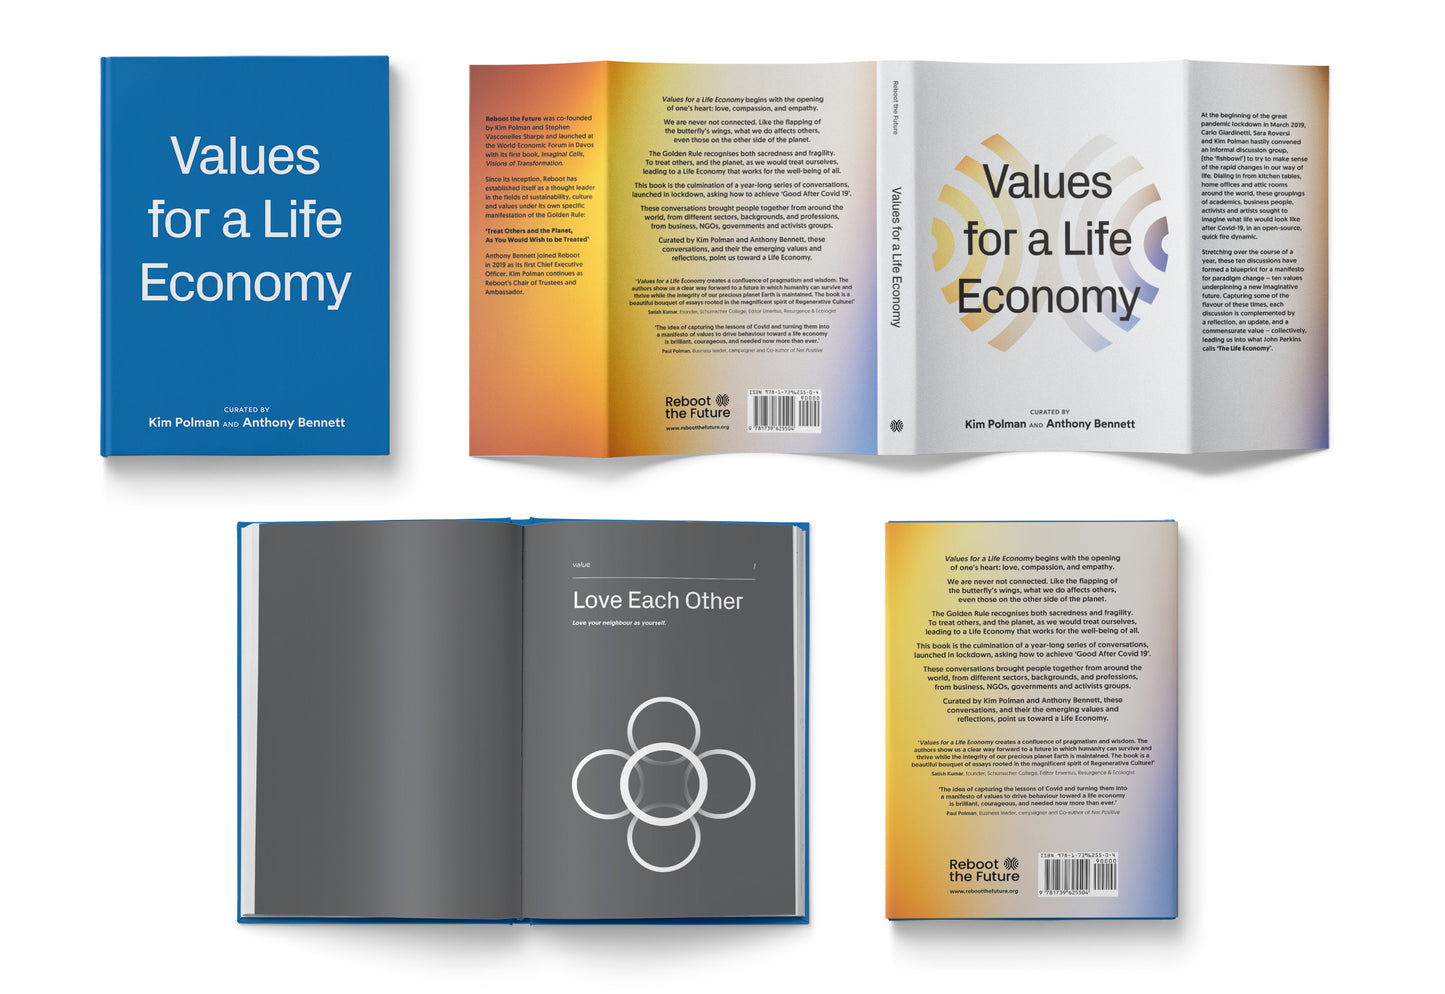 Values for a Life Economy